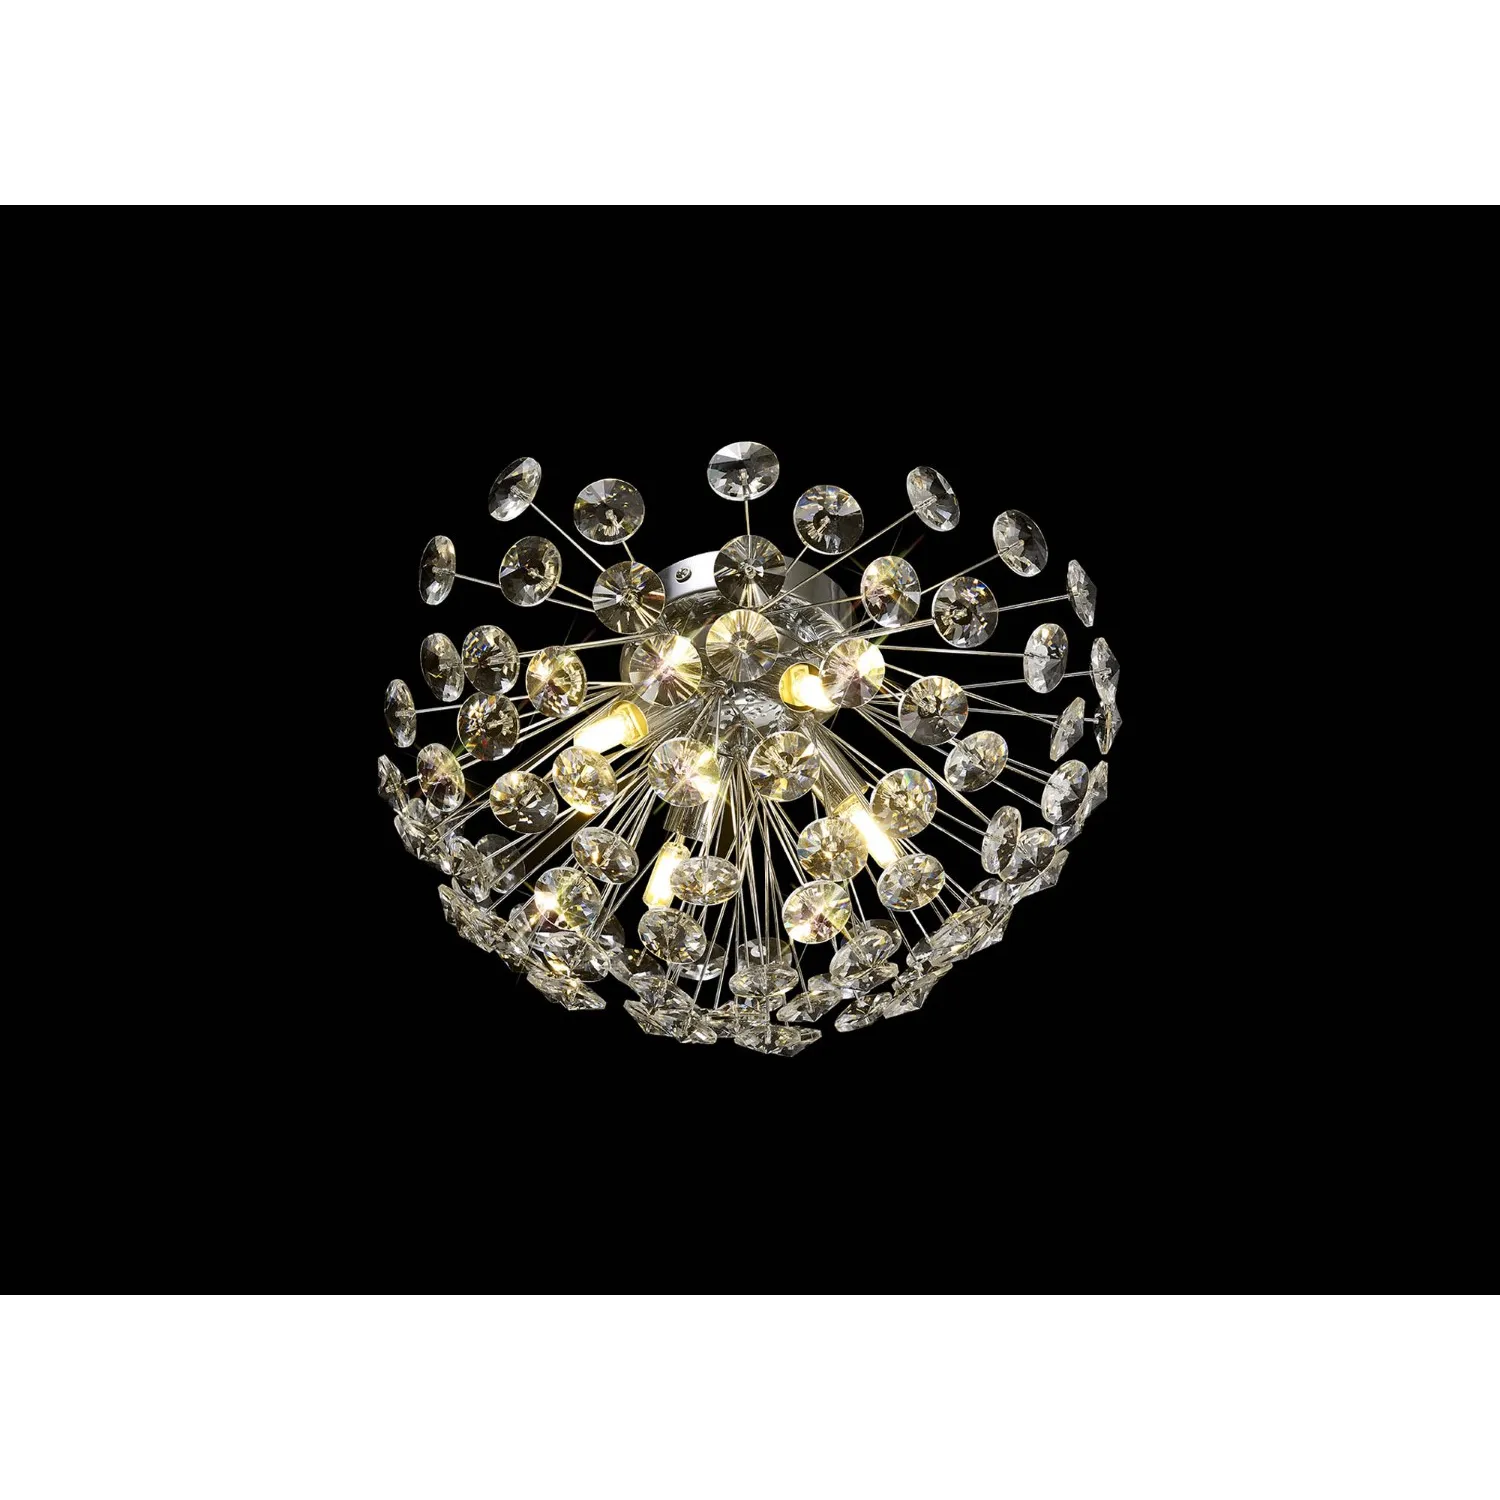 Camden Wall Ceiling 4 Light G9 Polished Chrome Crystal